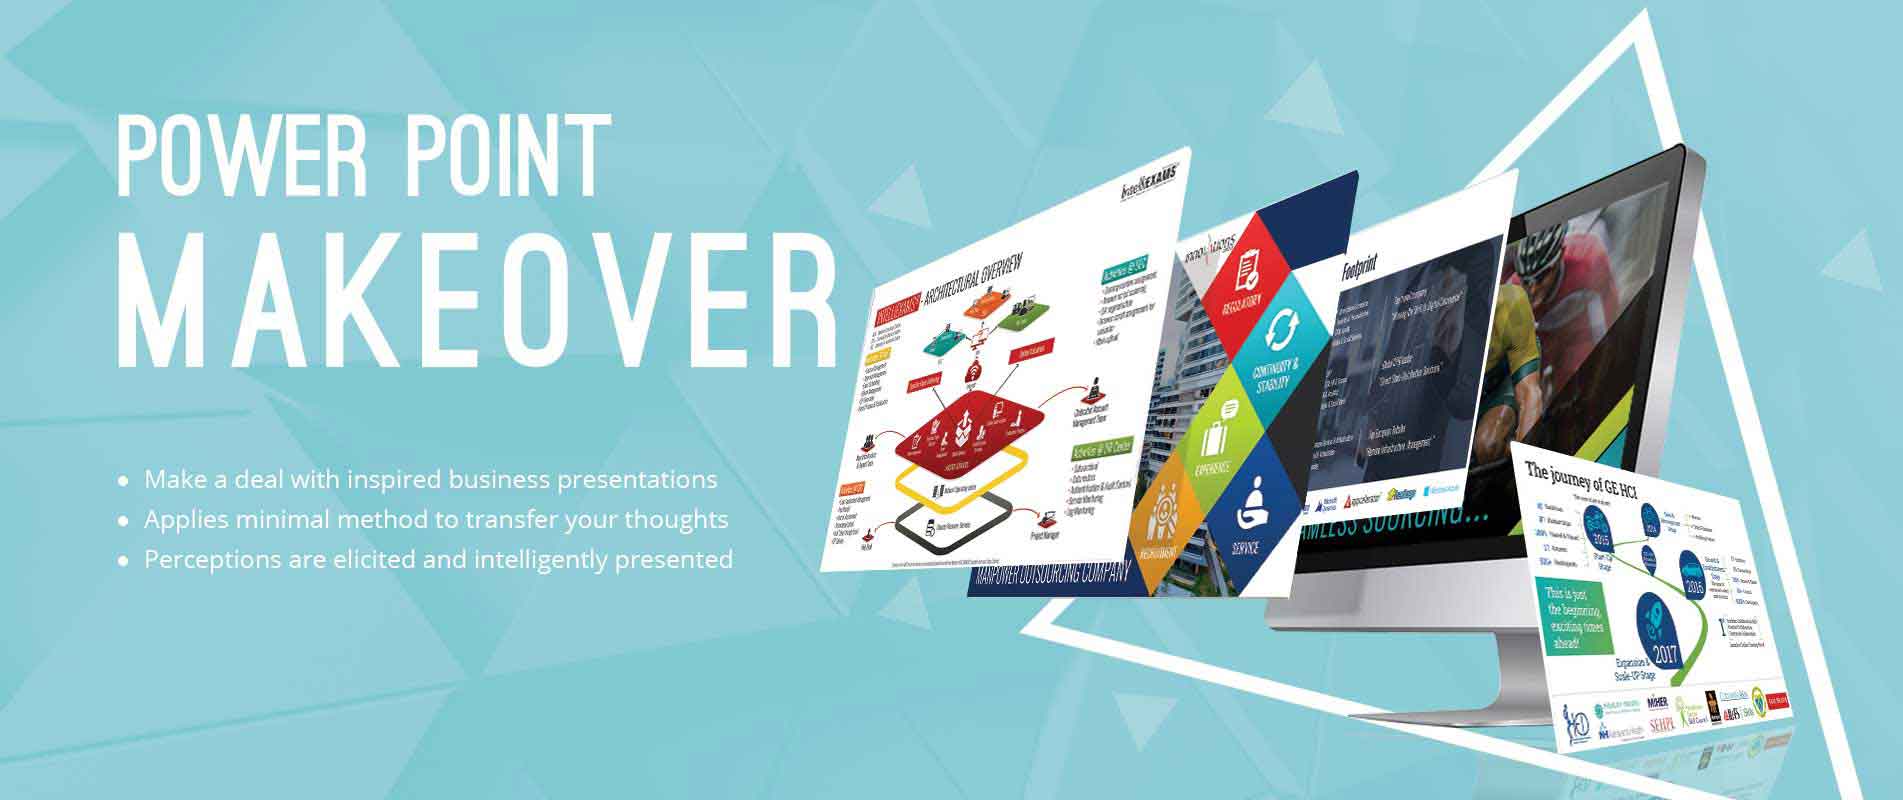 Professional Power point Presentation Services